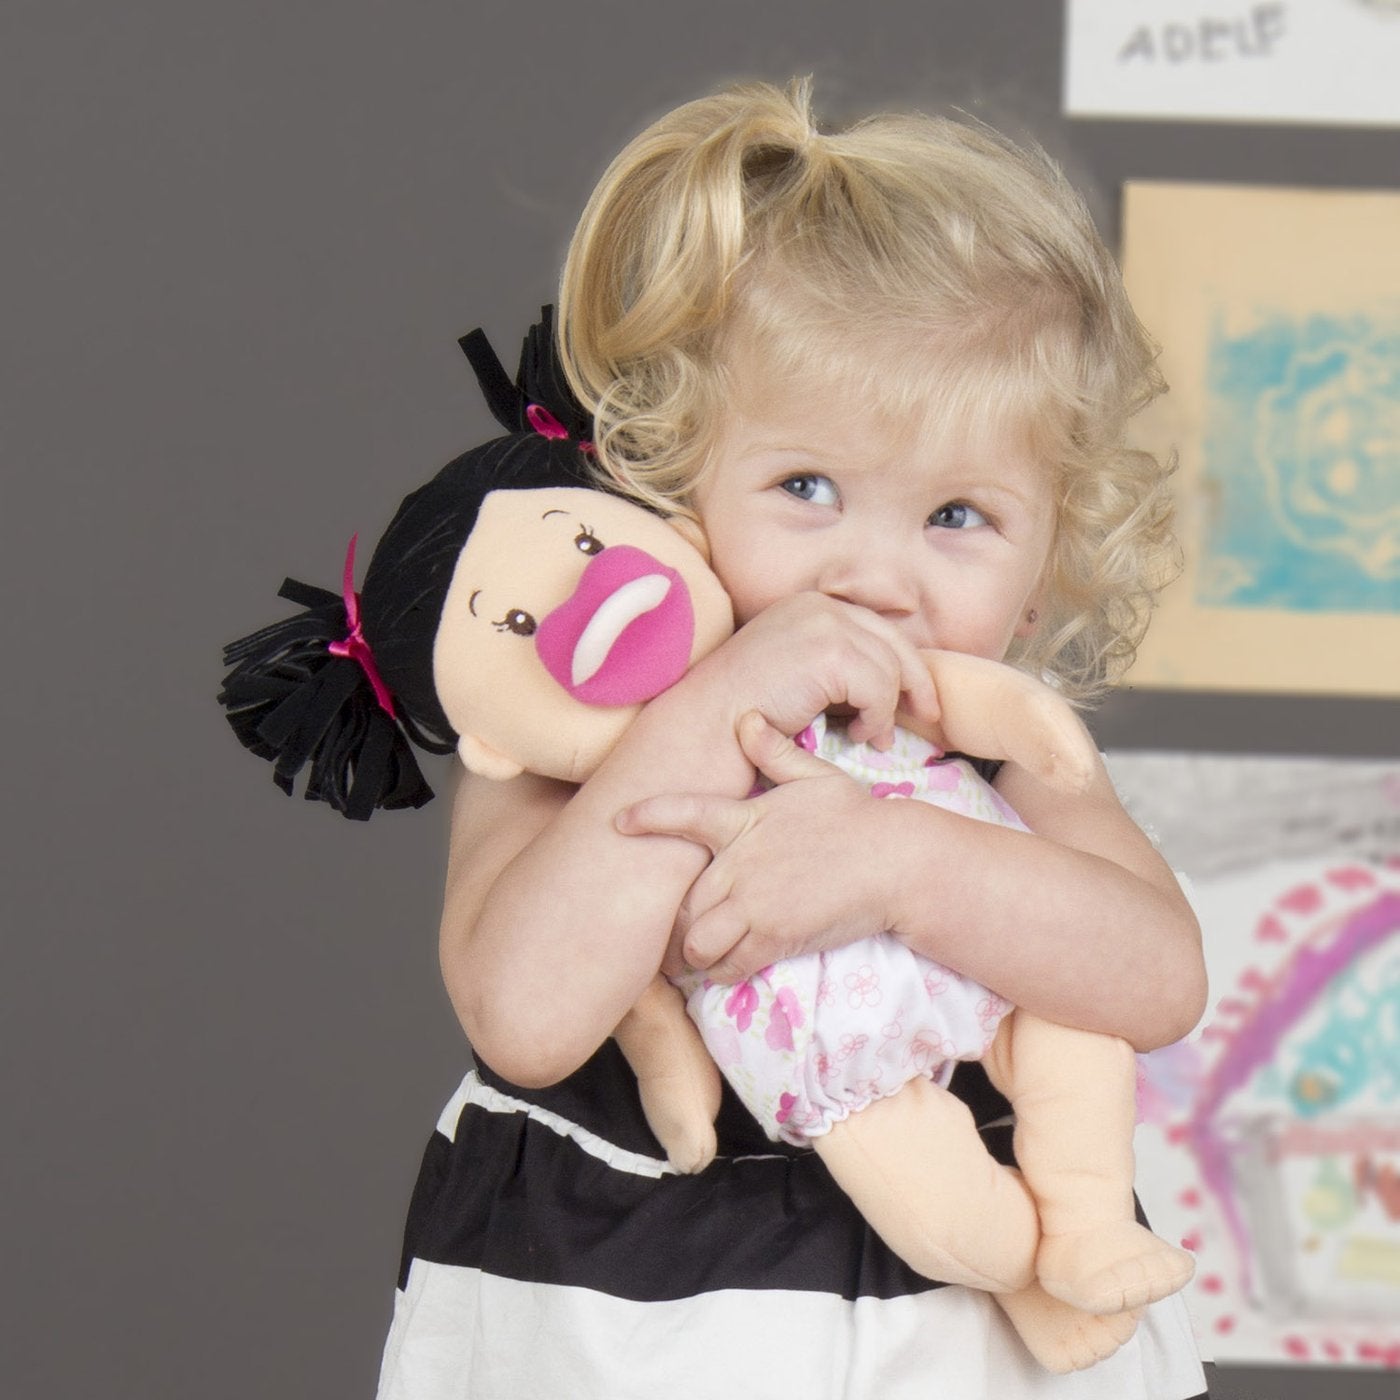 Manhattan Toy Baby Stella Peach Doll with Black Pigtails Toy - ANB Baby -$20 - $50